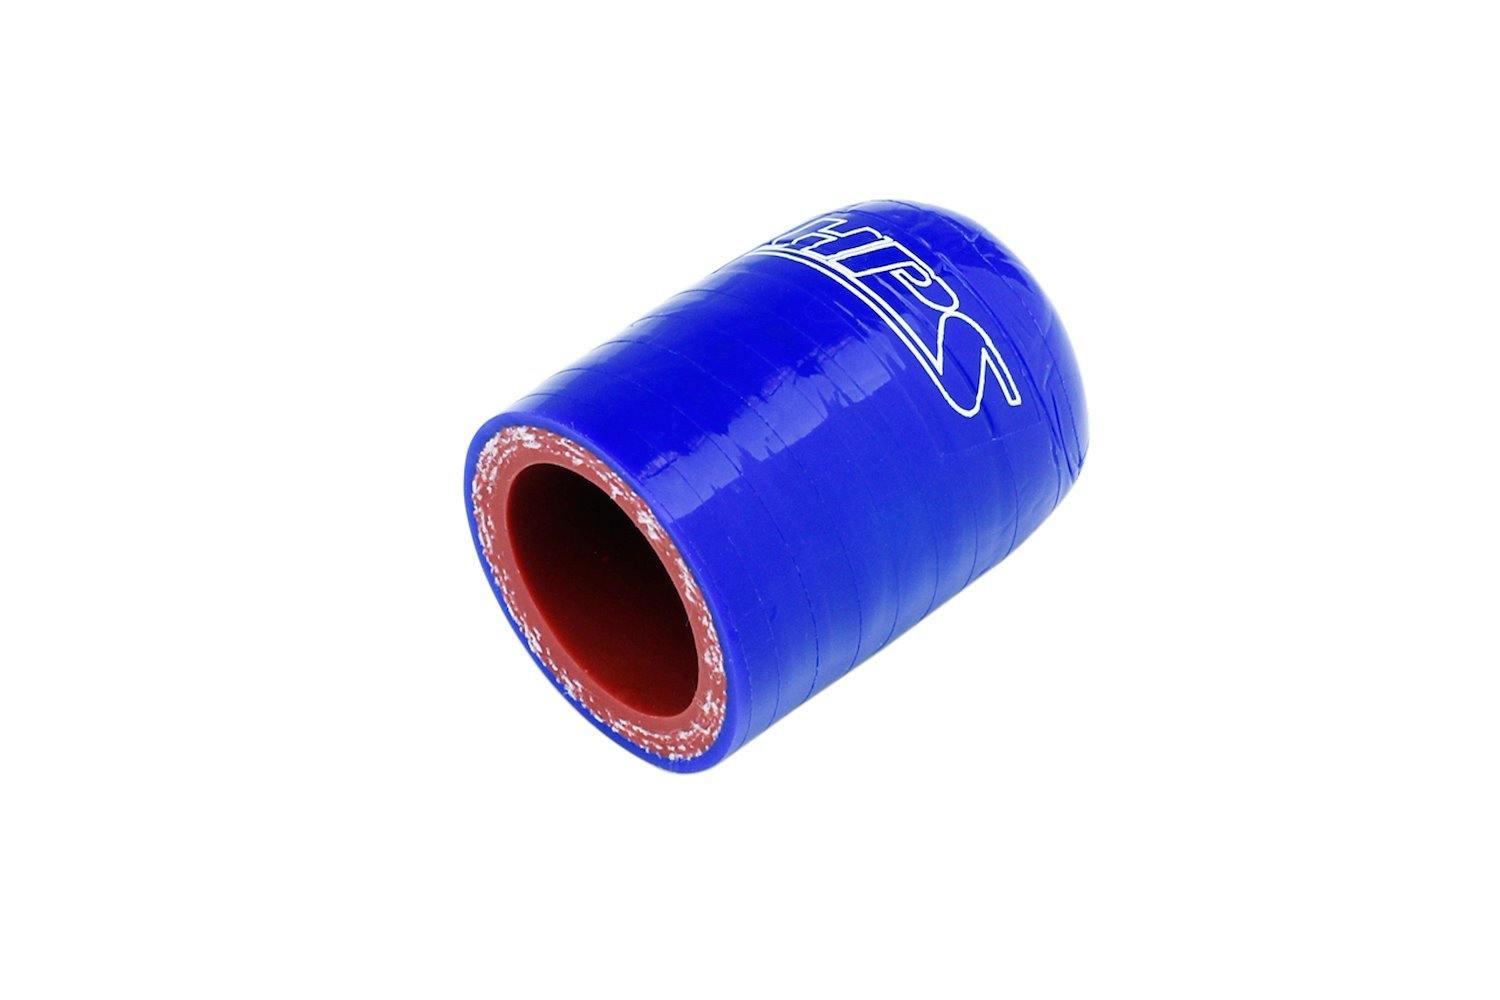 RSCC-050-BLUE Coolant Bypass Cap, 3-Ply Reinforced High-Temp. Silicone Bypass Cap, 1/2 in. ID, Blue